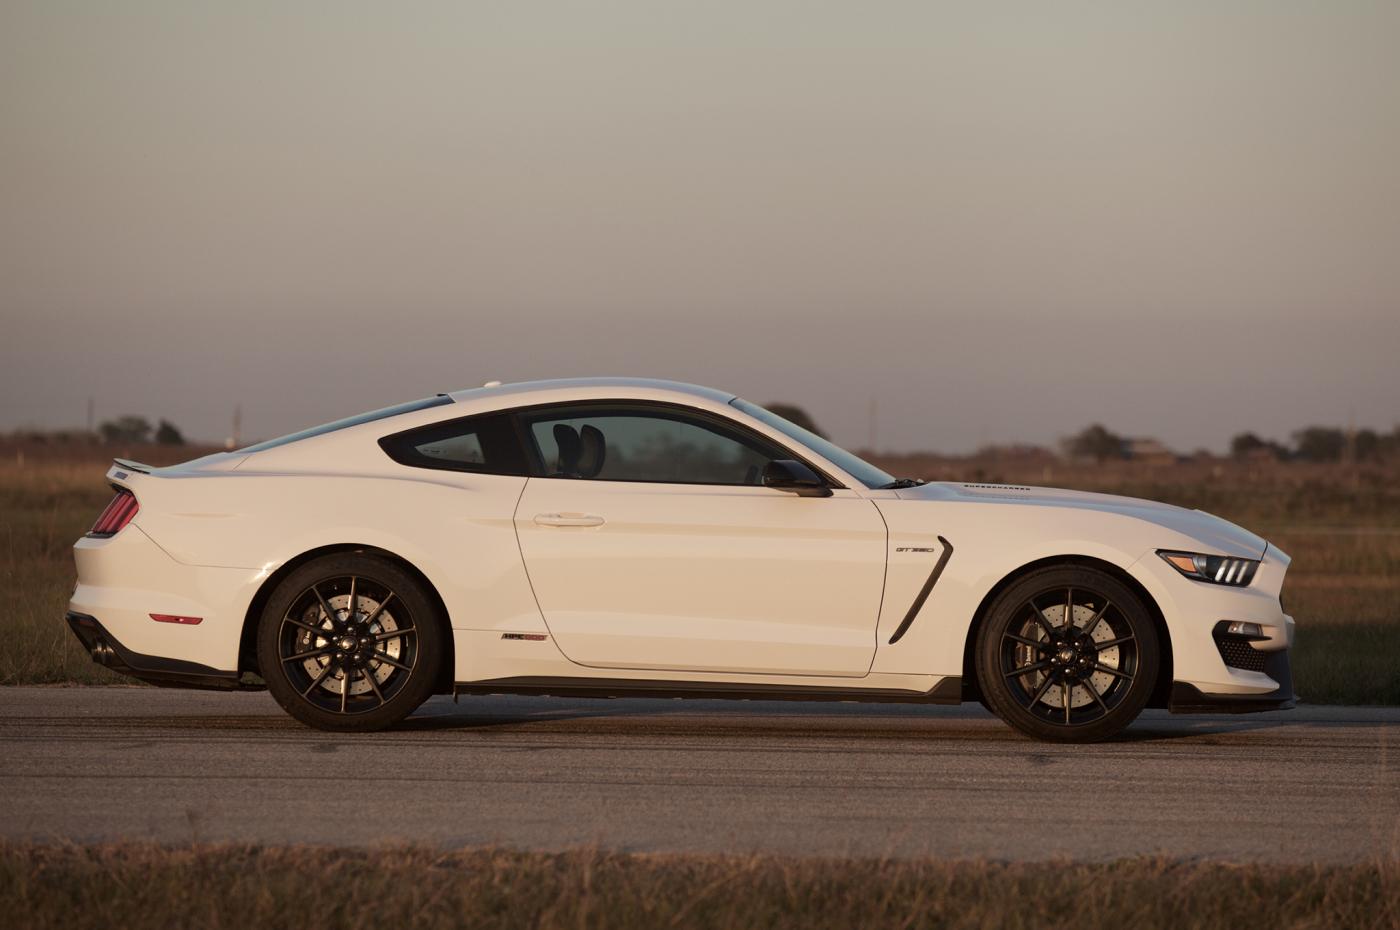 2016-Ford-Mustang-Shelby-GT350-HPE575-side.jpg